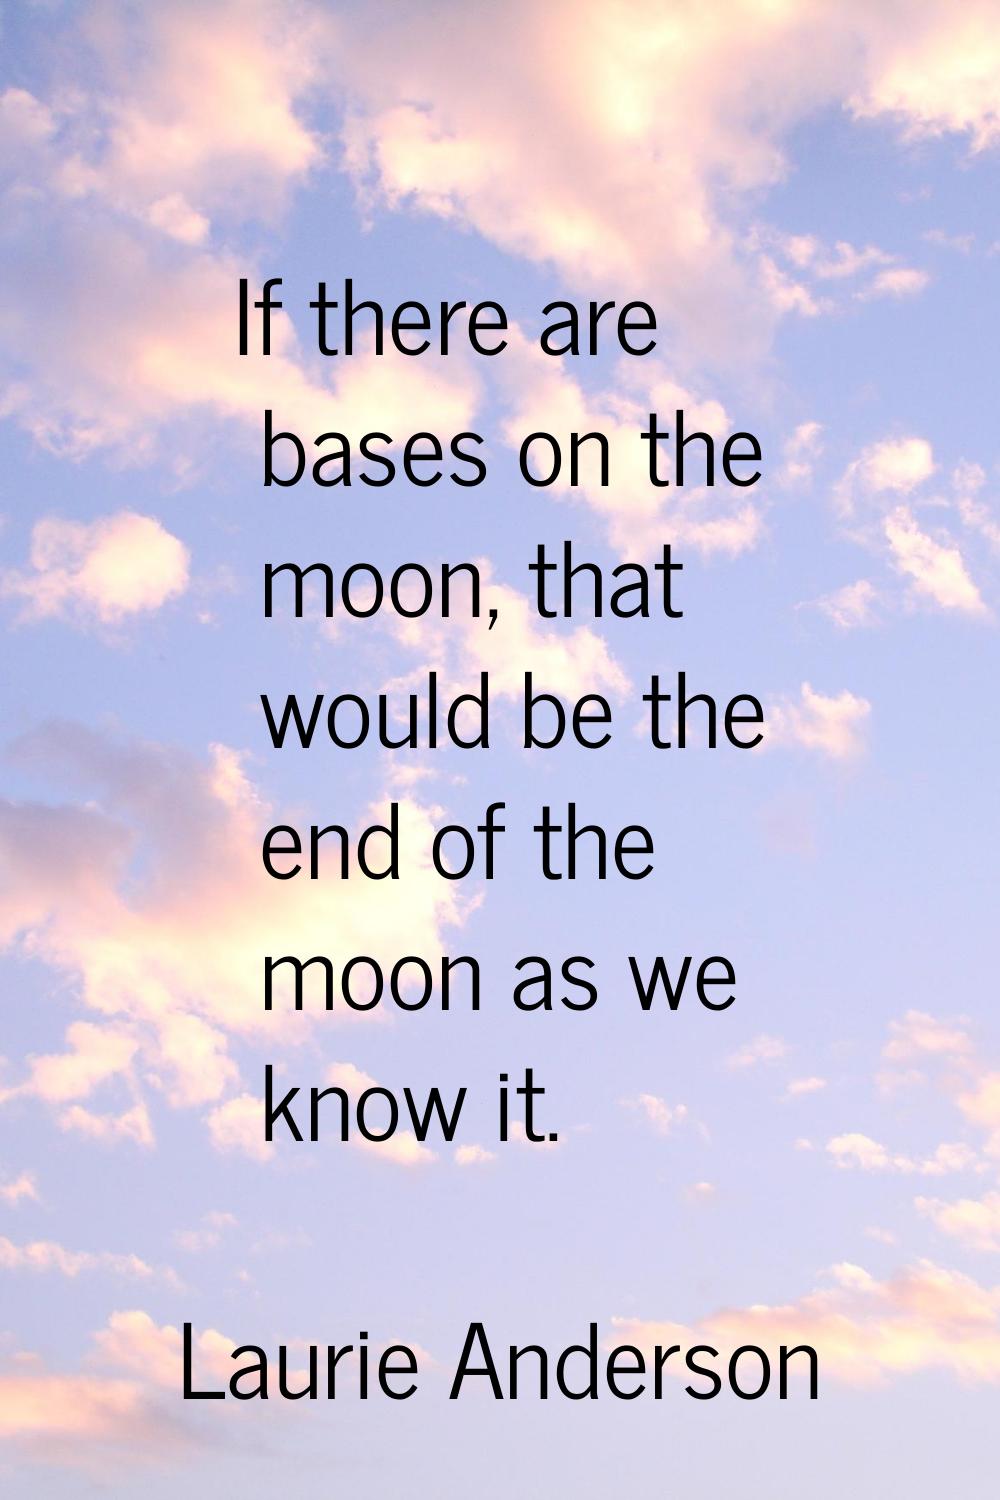 If there are bases on the moon, that would be the end of the moon as we know it.